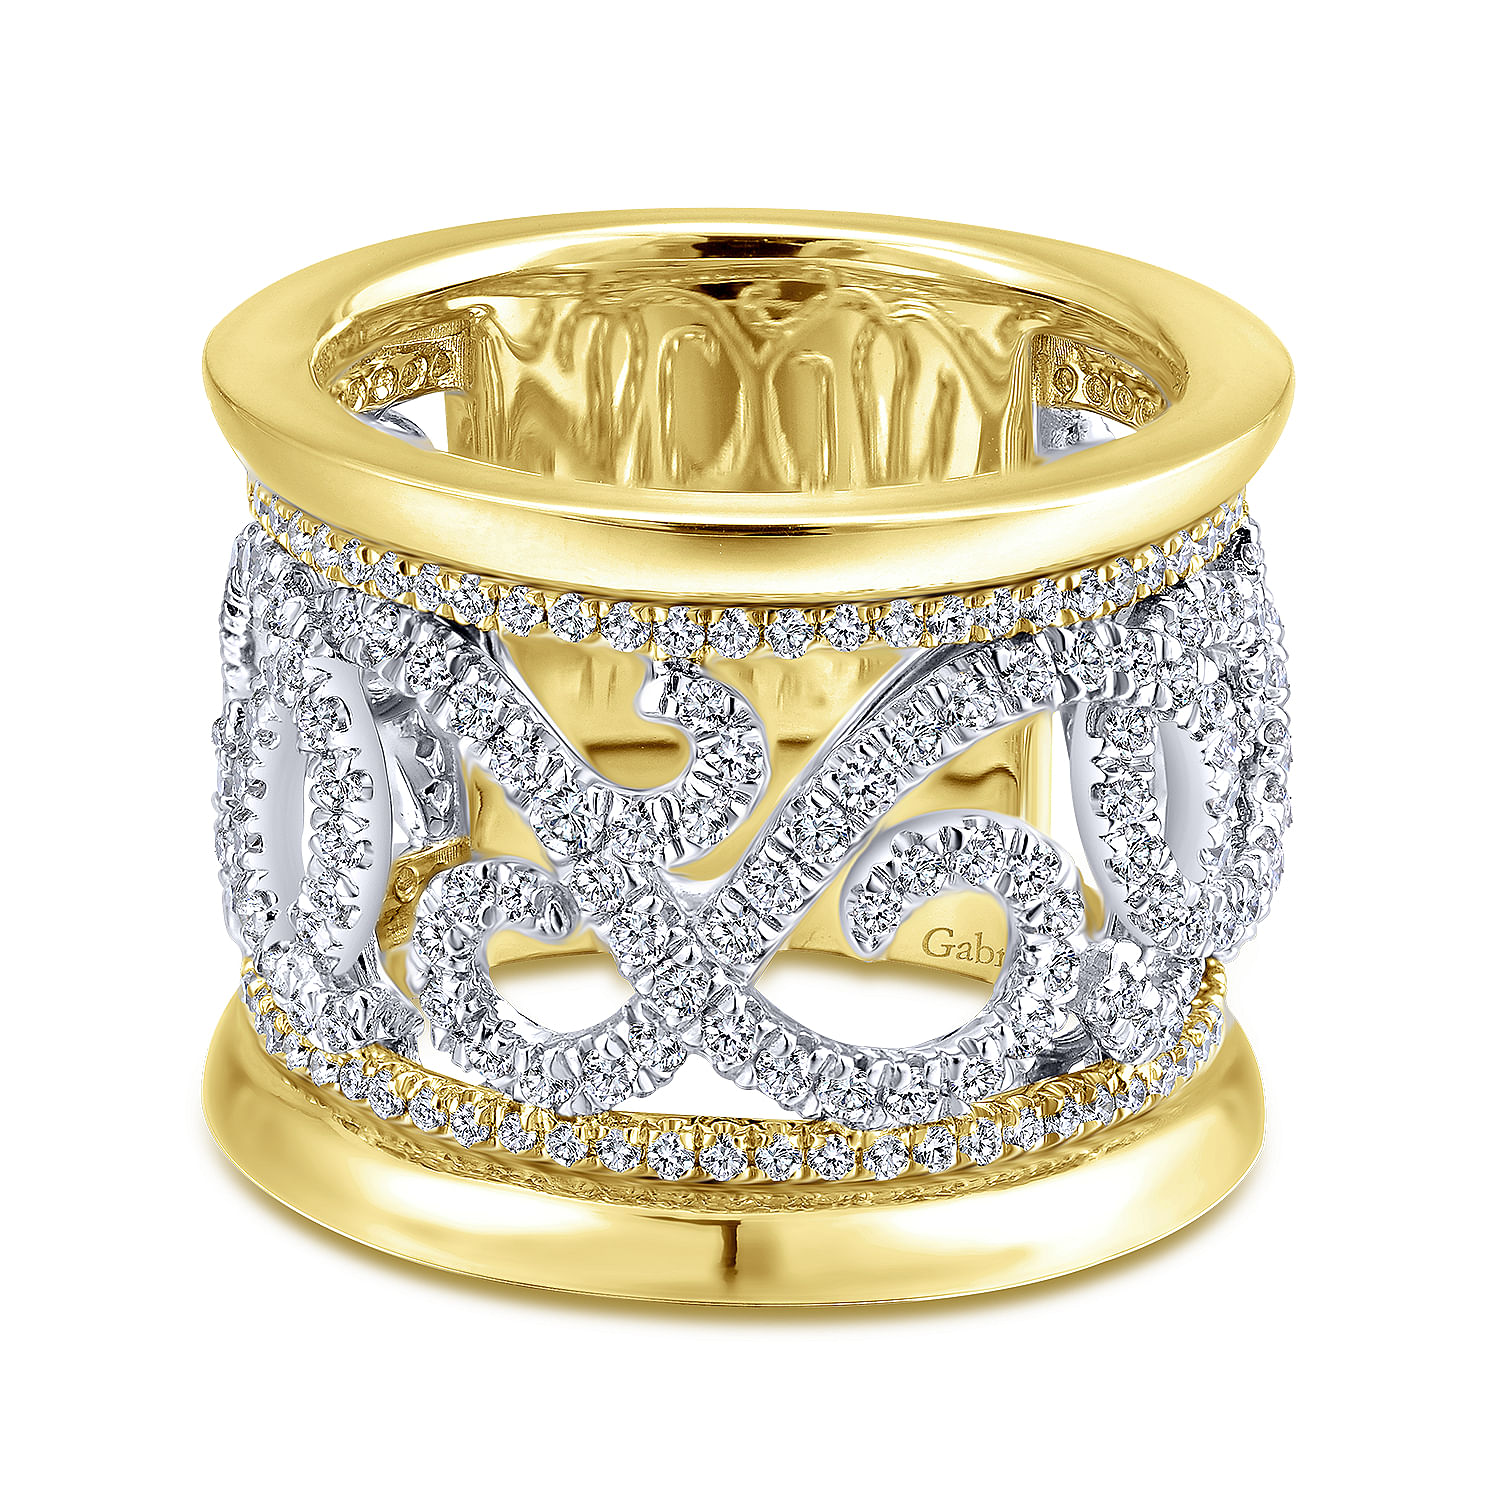 Wide 14K White and Yellow Gold French Pavé Set Fancy Diamond Anniversary Ring